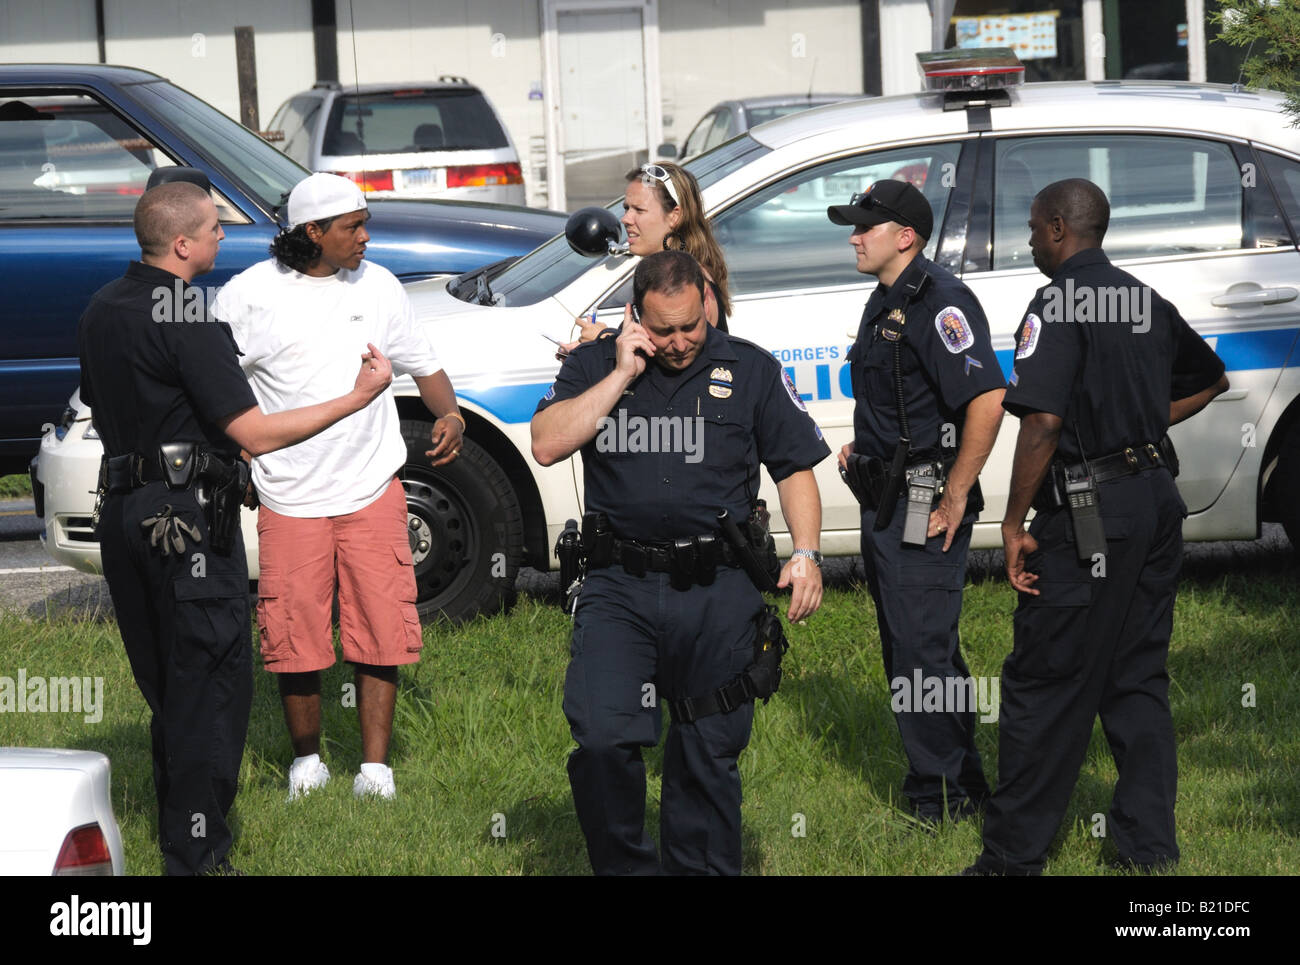 Police question a Latino man and a woman at a crime scene in College Park, Maryland Stock Photo